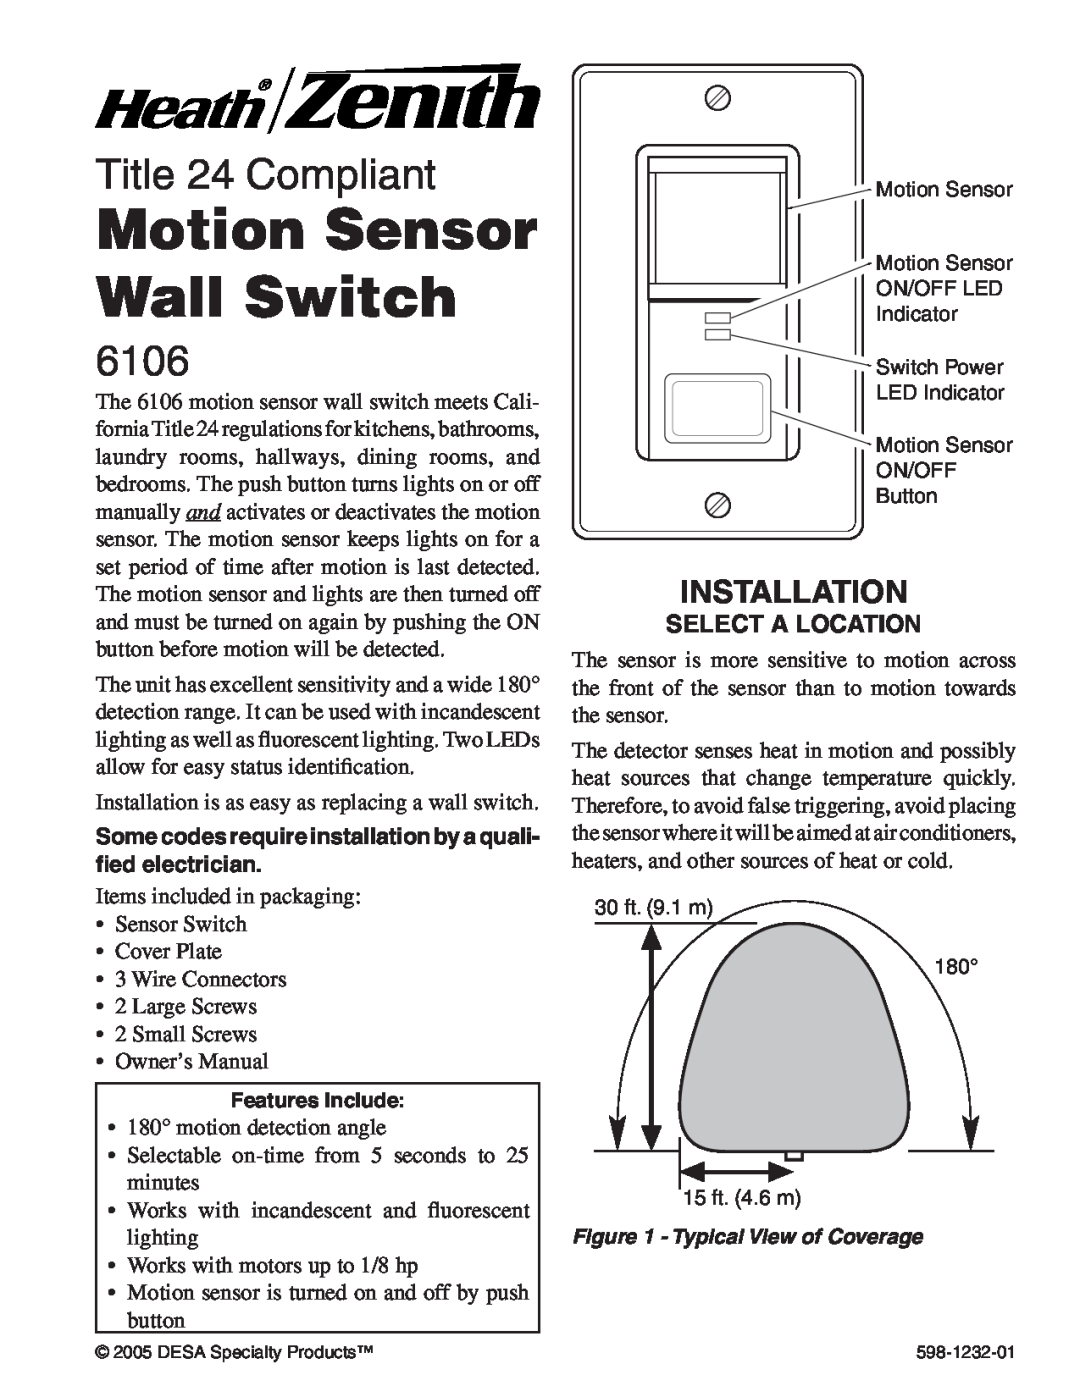 Heath Zenith 6106 owner manual Installation, Some codes require installation by a quali- ﬁed electrician, Features include 